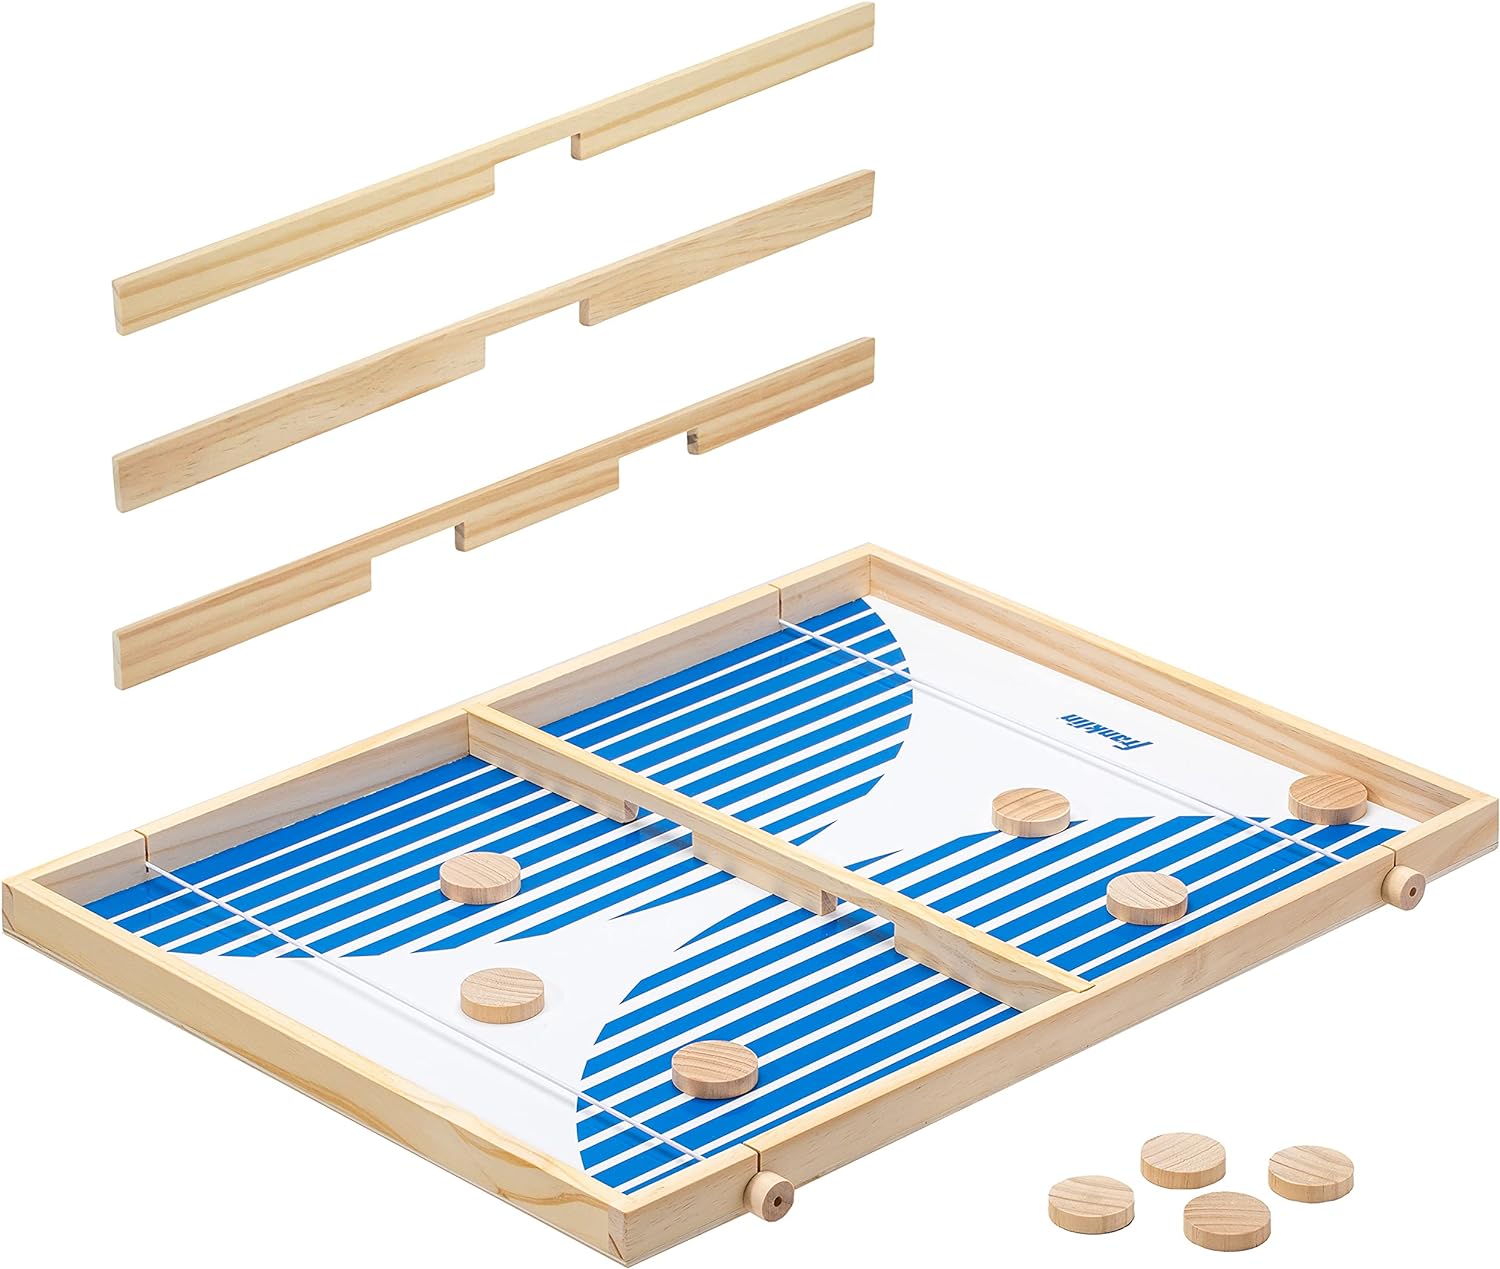 Franklin Sports XL Sling Puck Tabletop Hockey Game - Fast Puck Slinging Game for All Ages